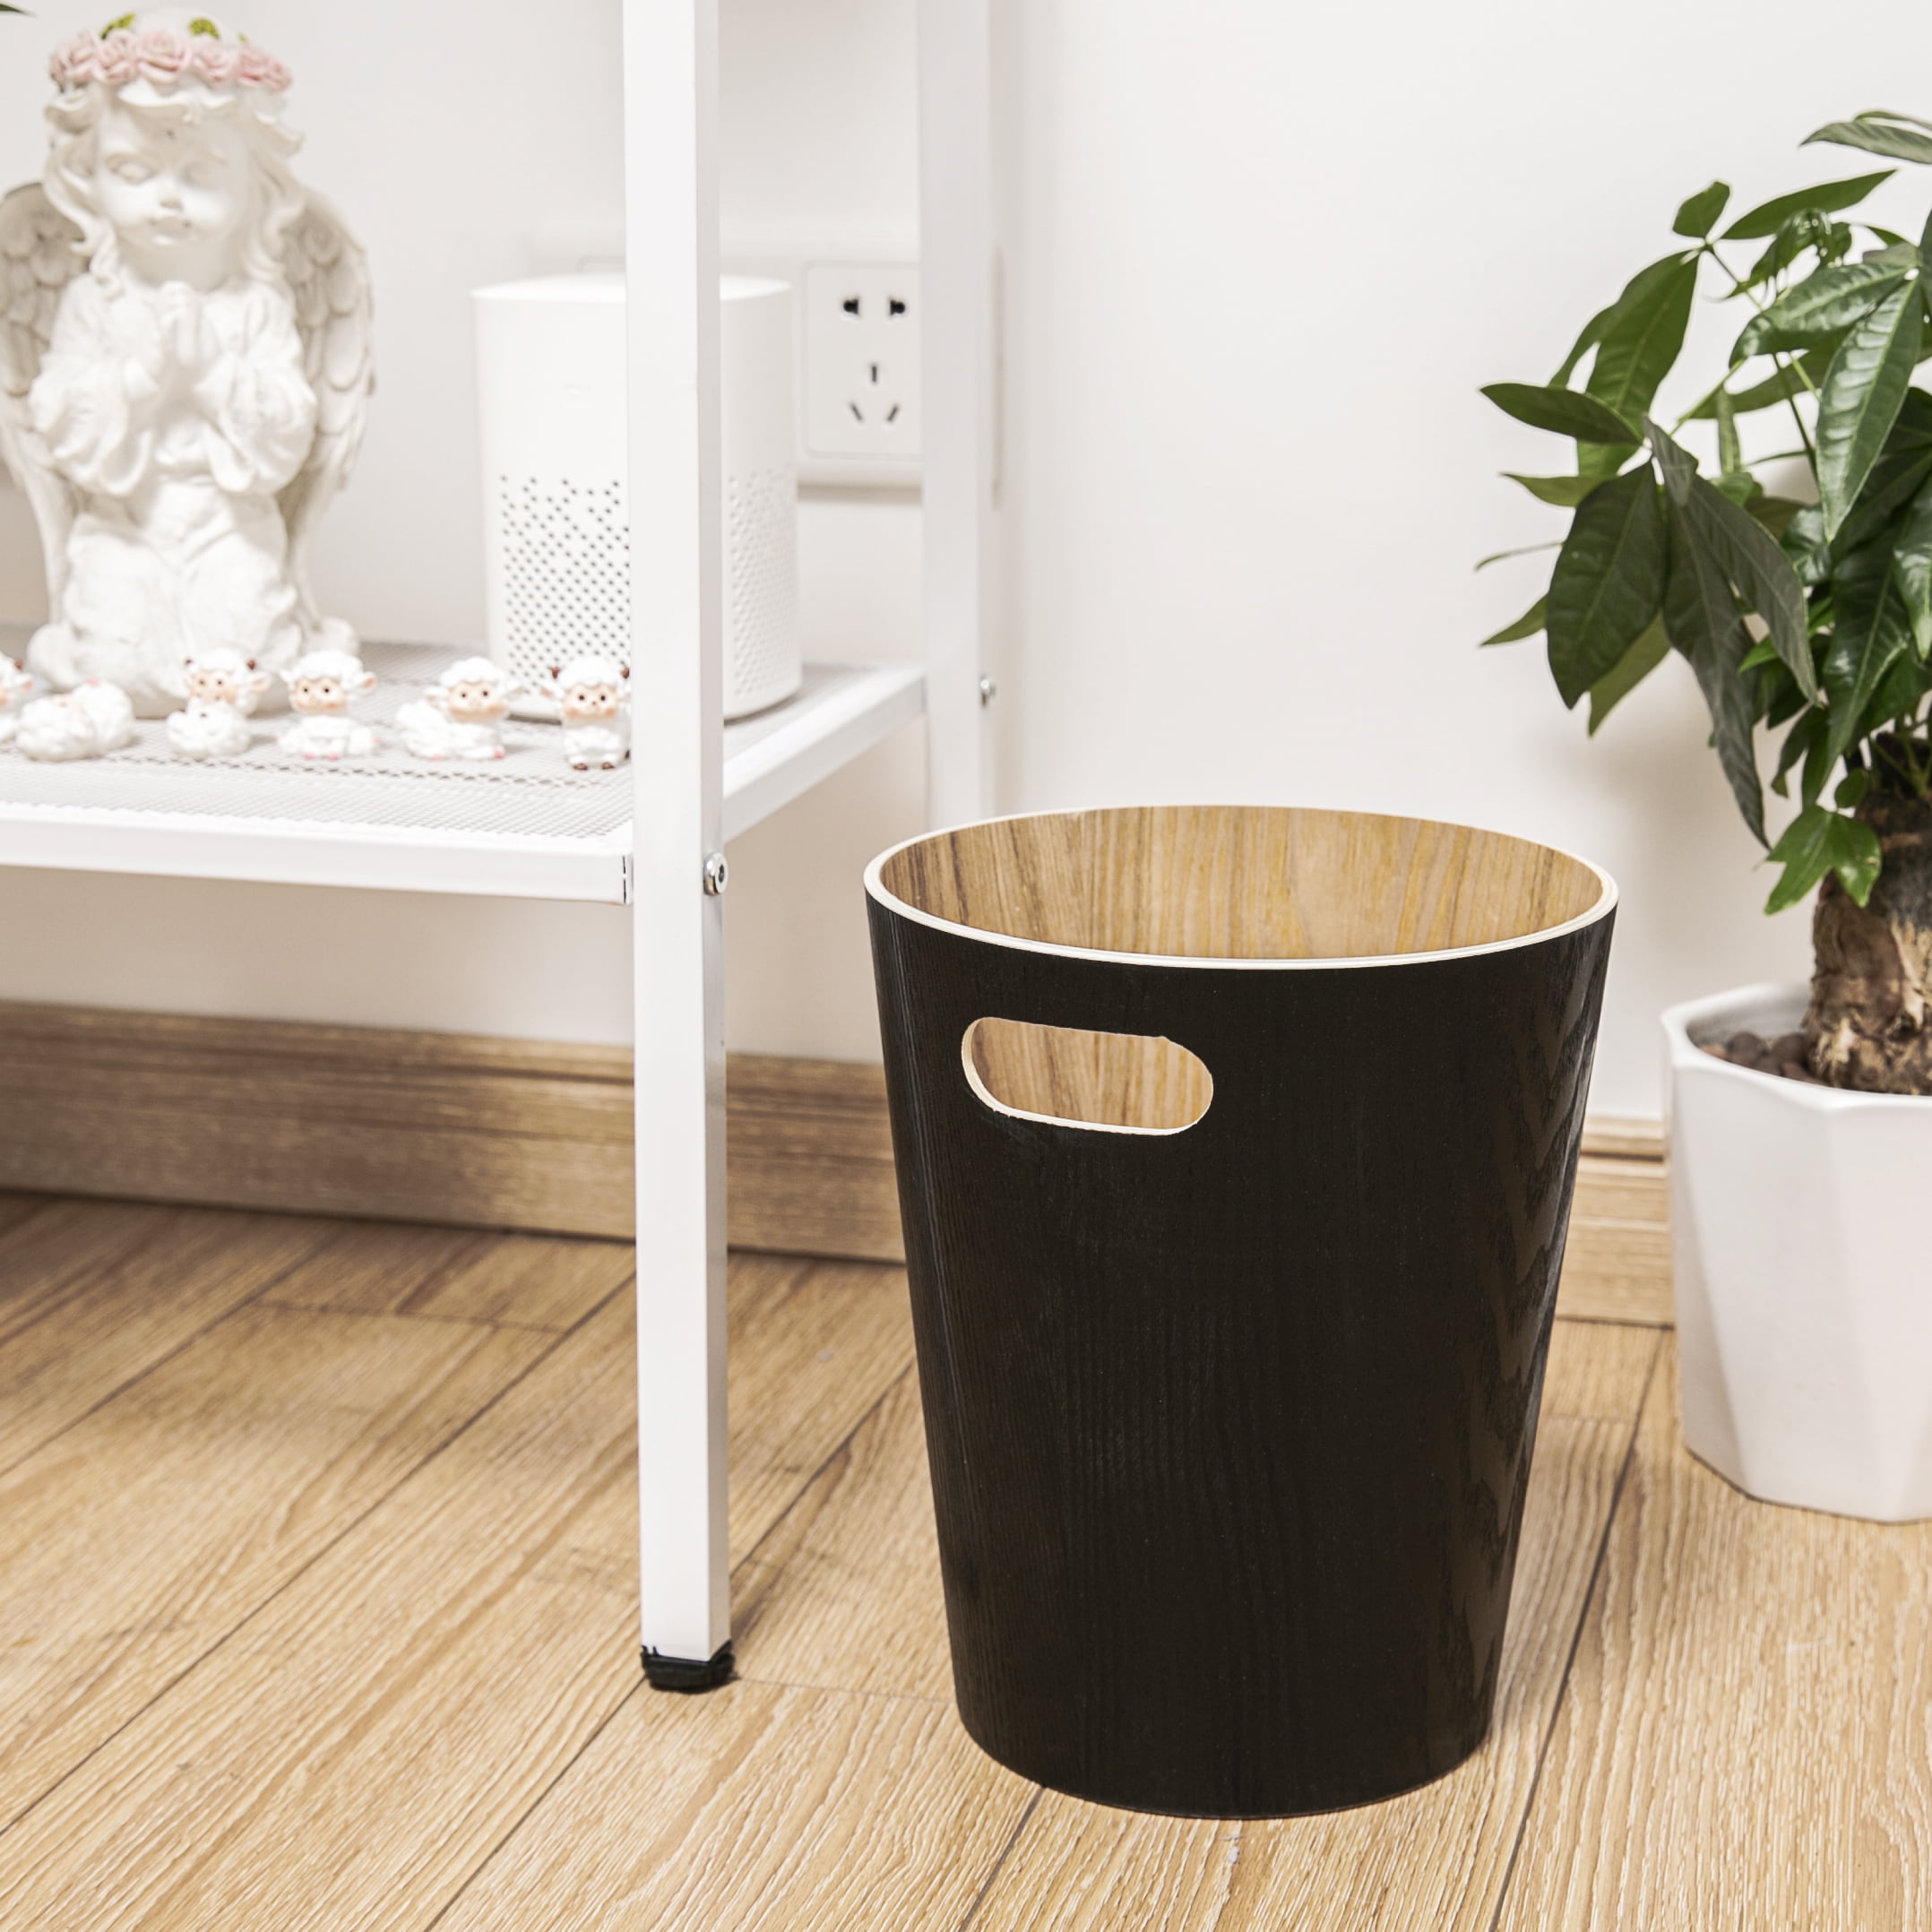 Homie Soft Close, Slim Trash Can 2.6 Gallon with Anti - Bag Slip Liner and Lid, Use As Mini Garbage Basket, Slim Dust Bin, or Decor in Bathroom